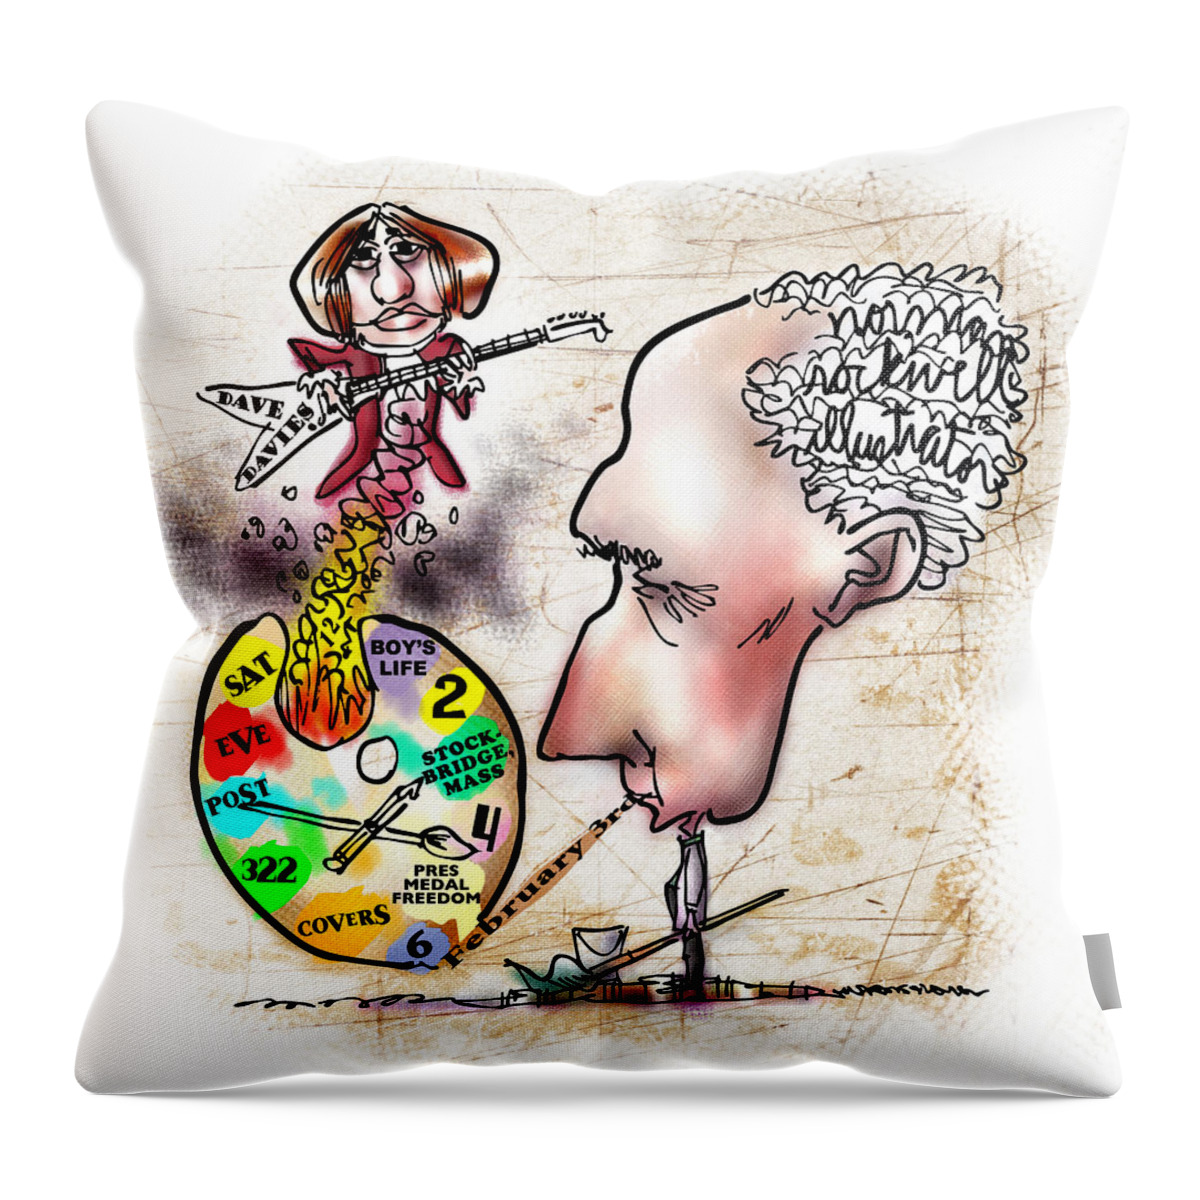 Norman Rockwell Throw Pillow featuring the digital art Happy Birthday Norman Rockwell by Mark Armstrong